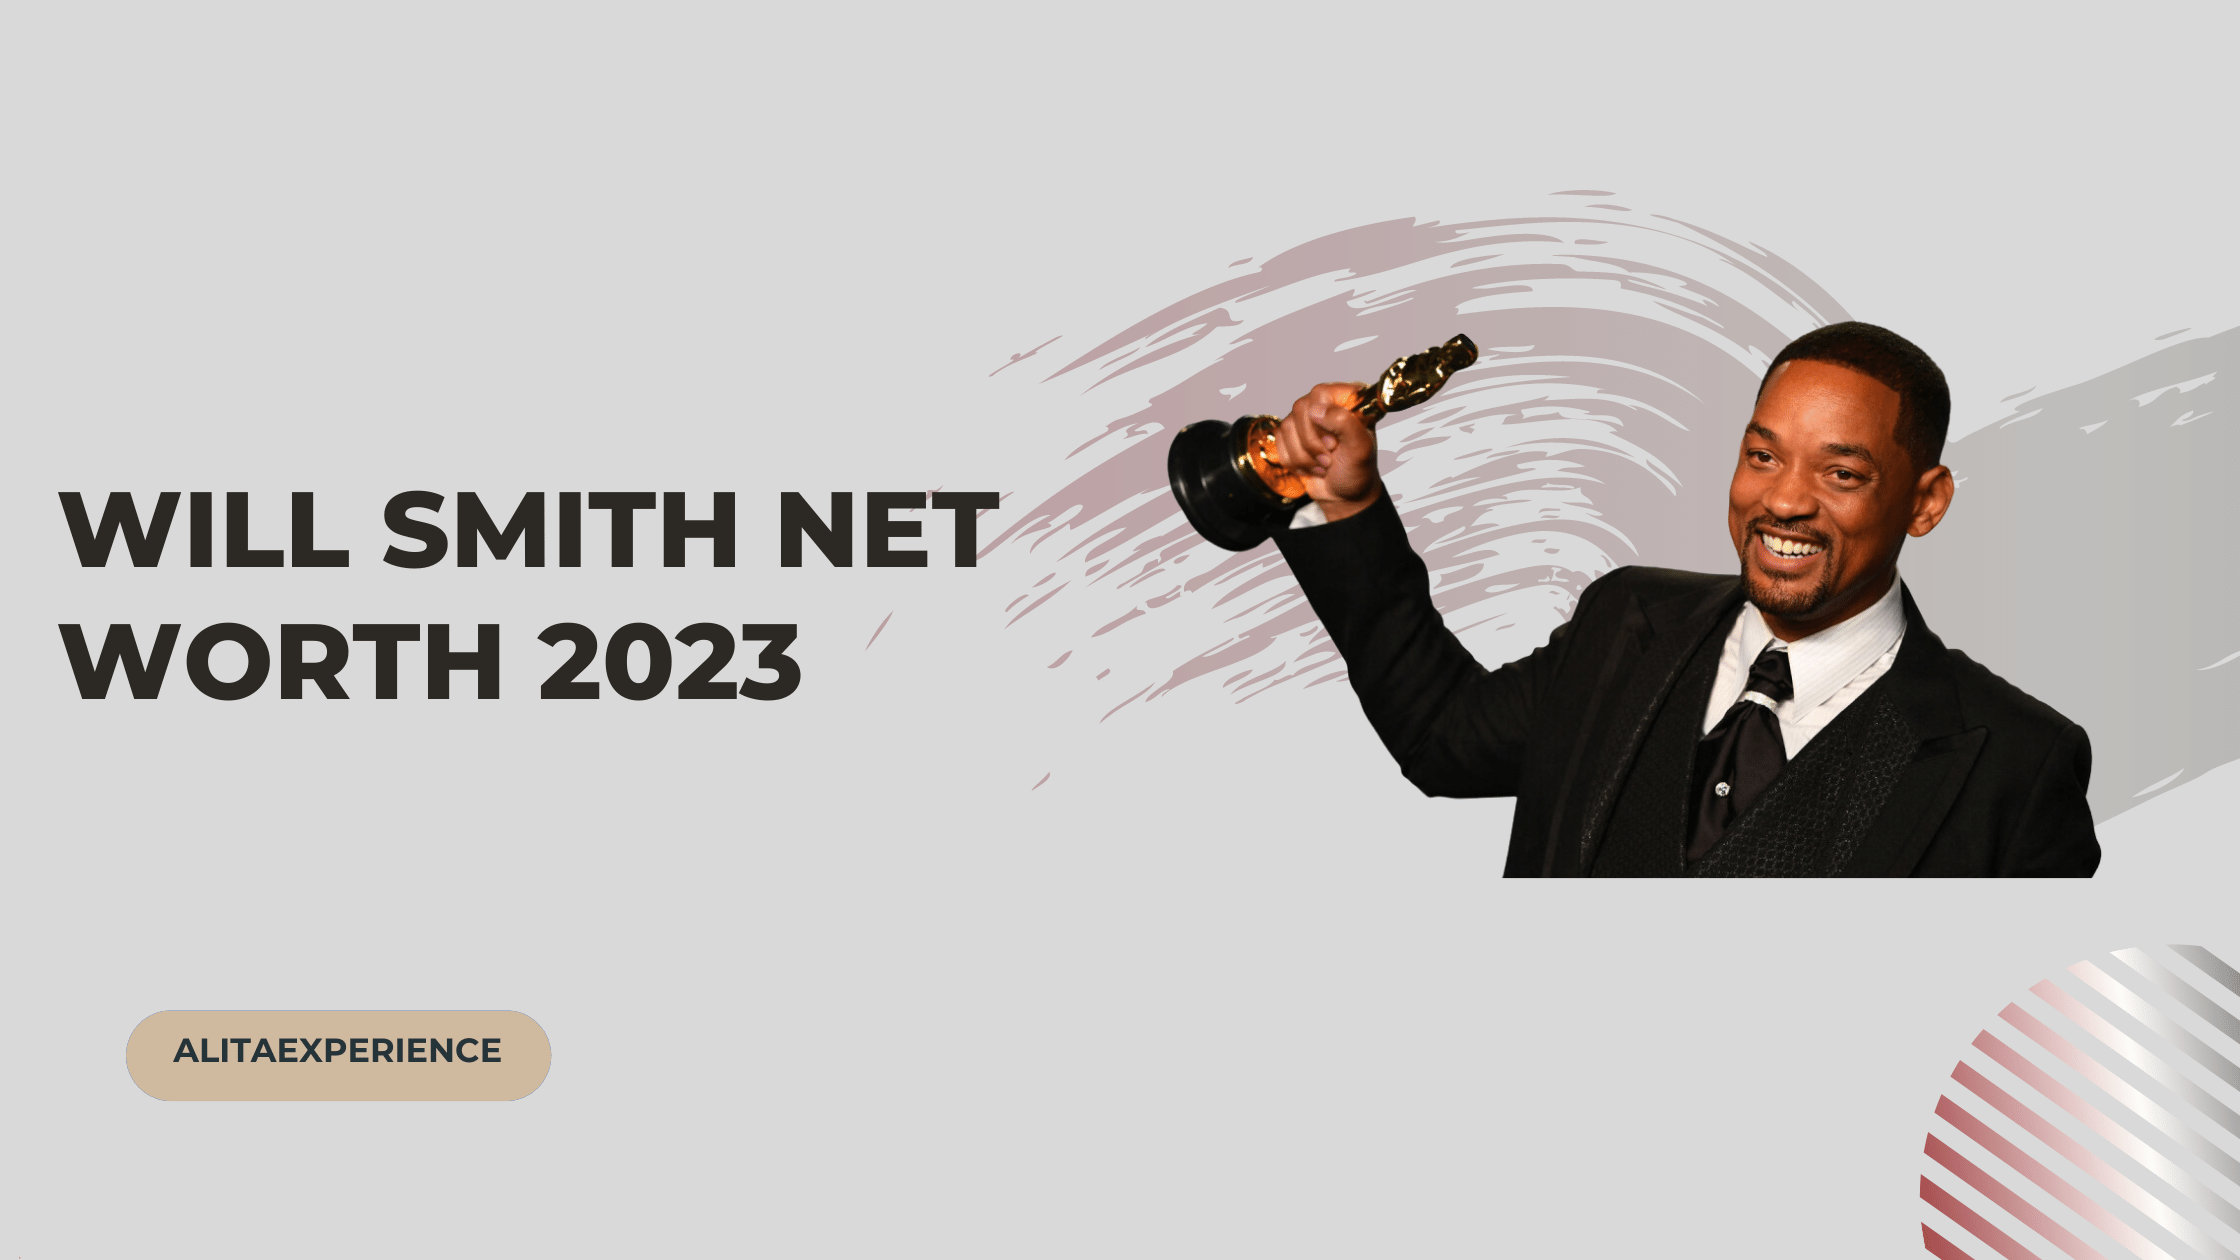 Will Smith's Net Worth 2023, Salary, Endorsements, House, Cars and more